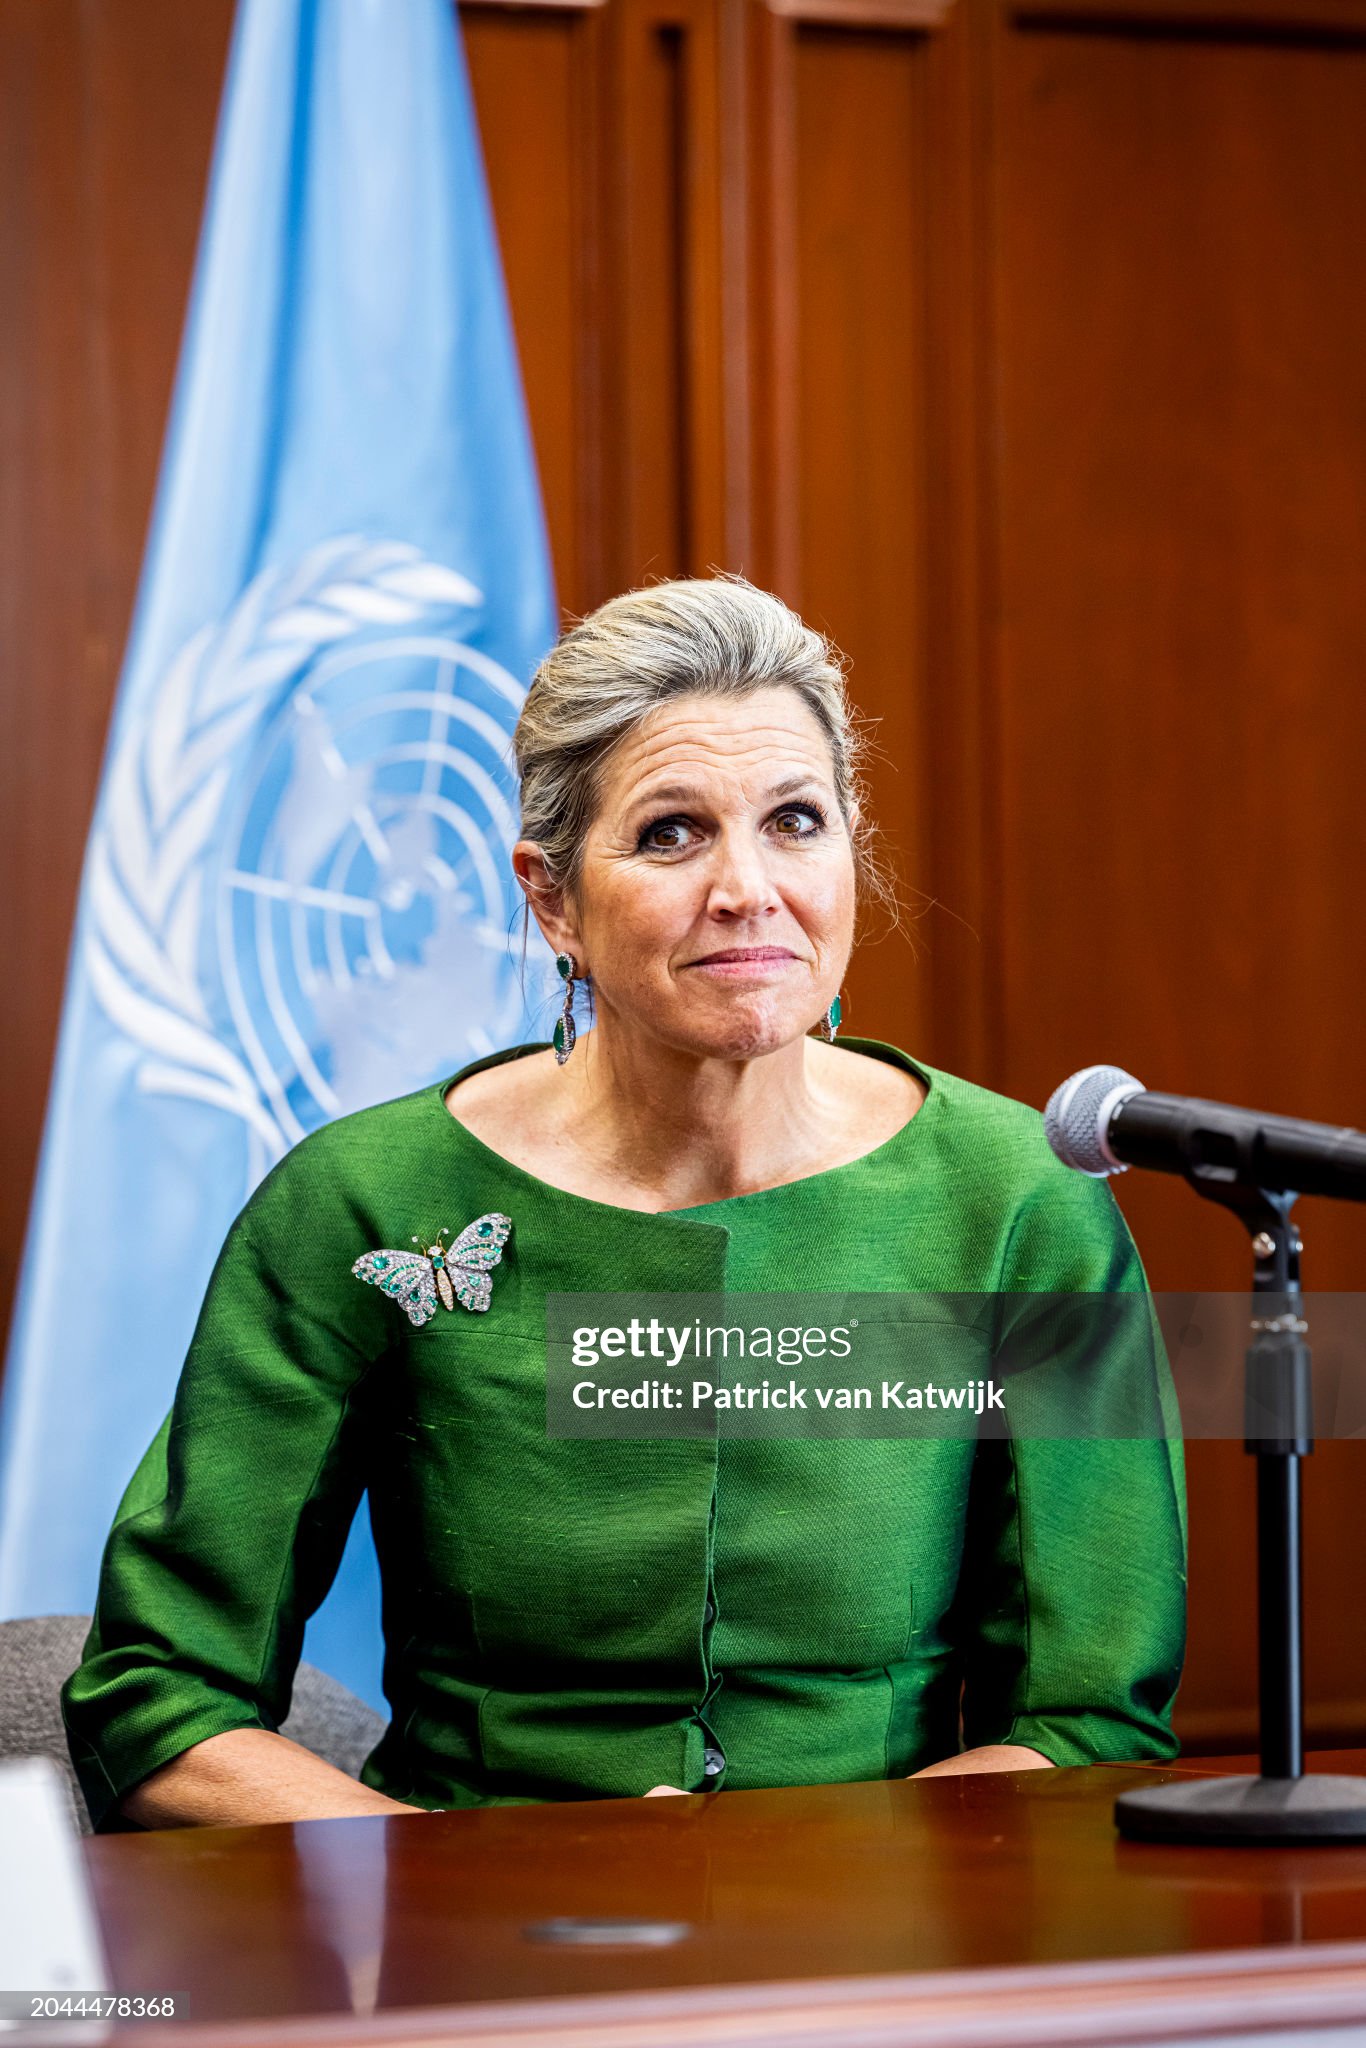 queen-maxima-of-the-netherlands-visits-colombia-day-two.jpg?s=2048x2048&w=gi&k=20&c=7PRy9yYdh53UFdRm9ThMifIE4FfZTgkwmCLWCs9RJNM=